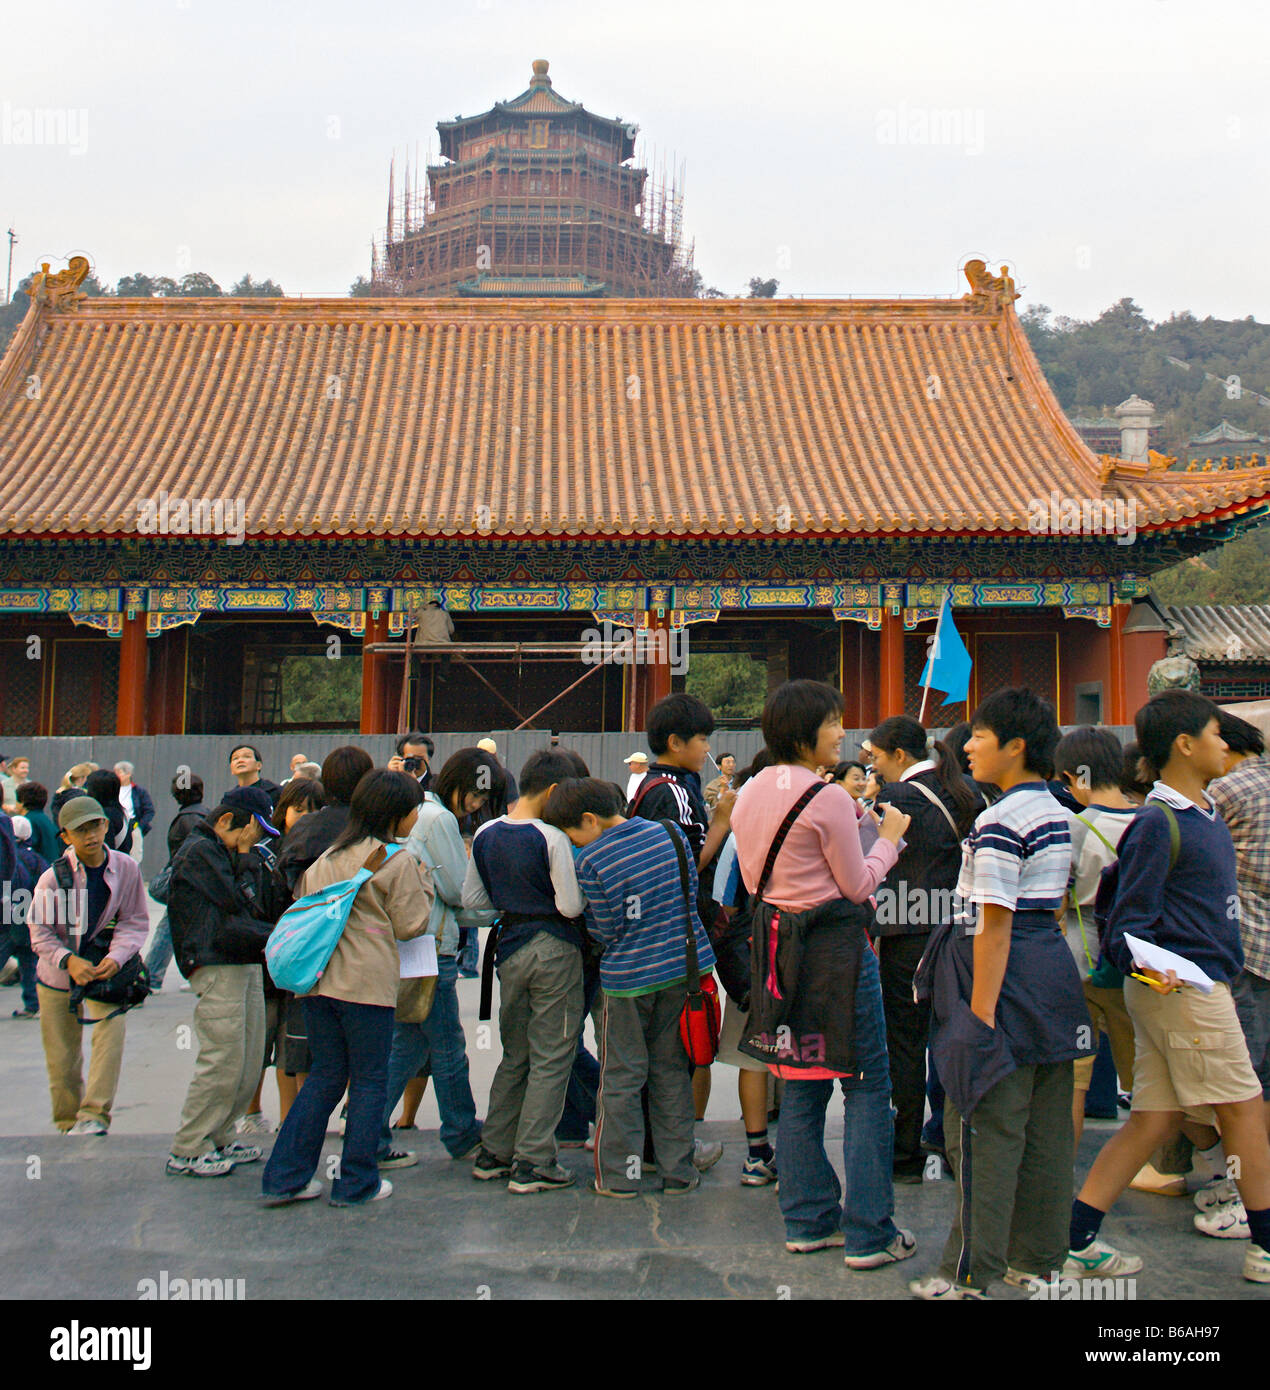 CHINA BEIJING Tour group of Chinese school children enters the Forbidden City also known as the Gugong or Imperial Palace Stock Photo